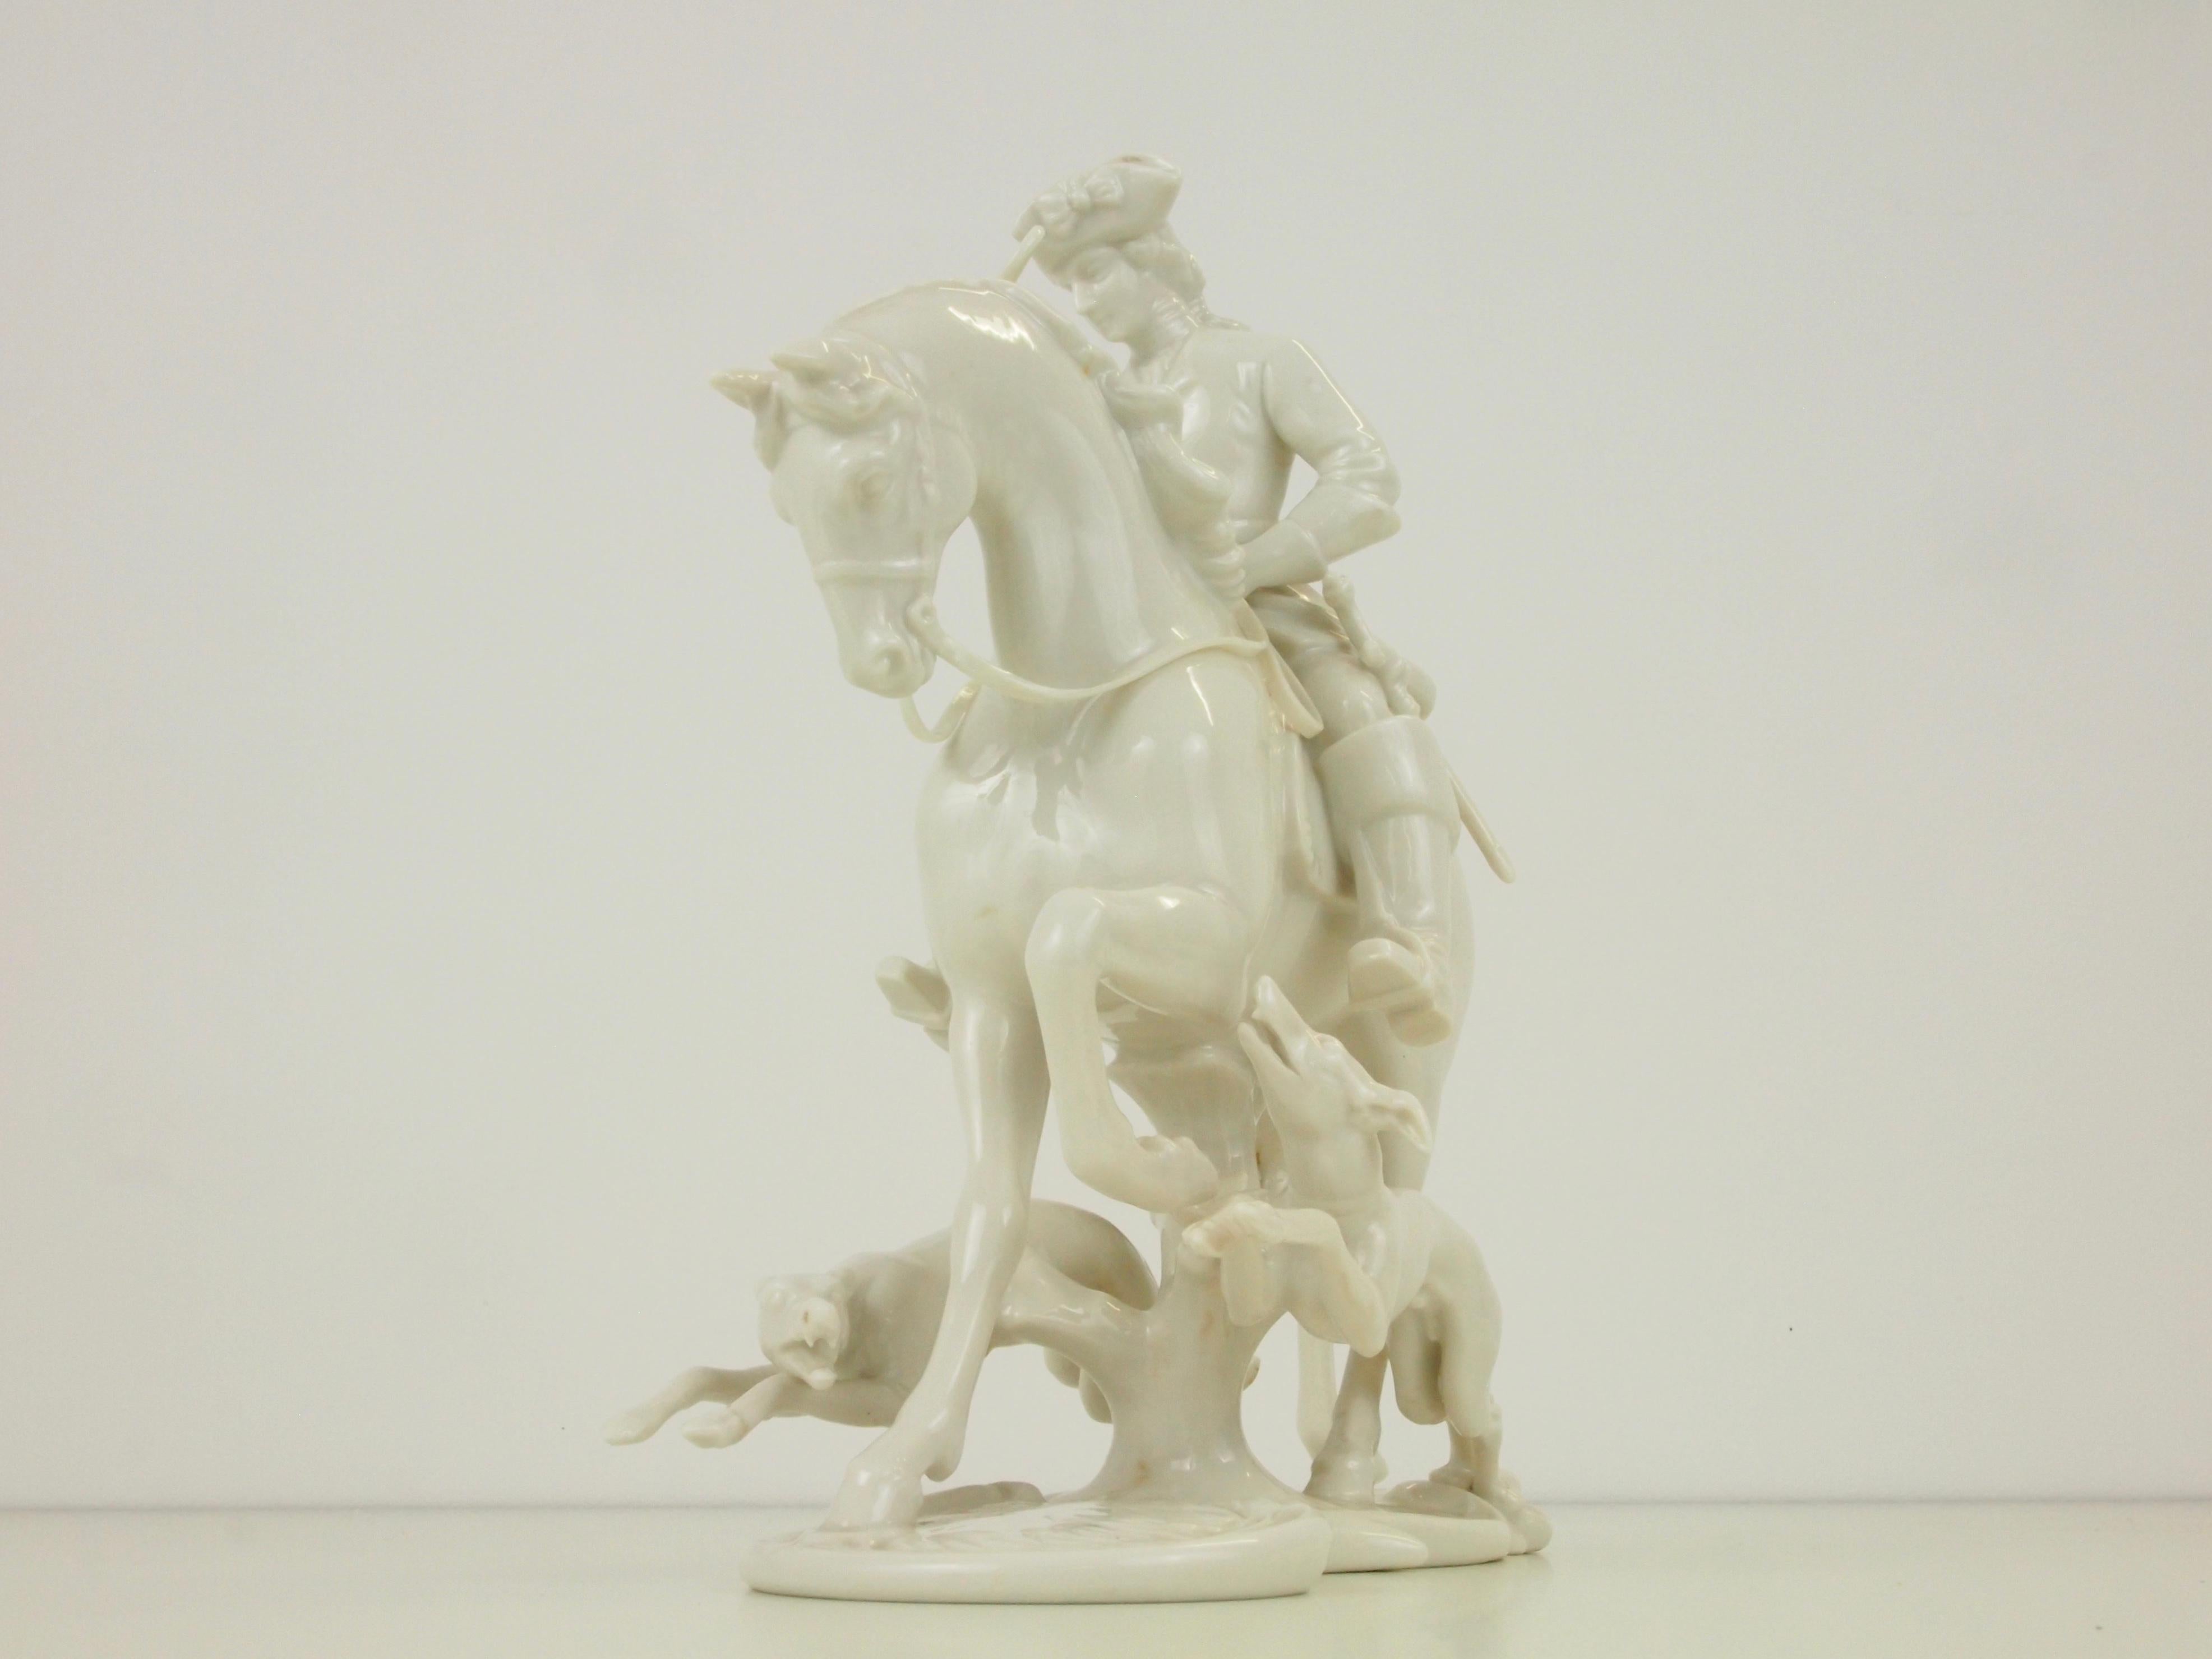 Nymphenburg Porcelain Figurine Depicting a Horse Rider in a Hunting Scene For Sale 8